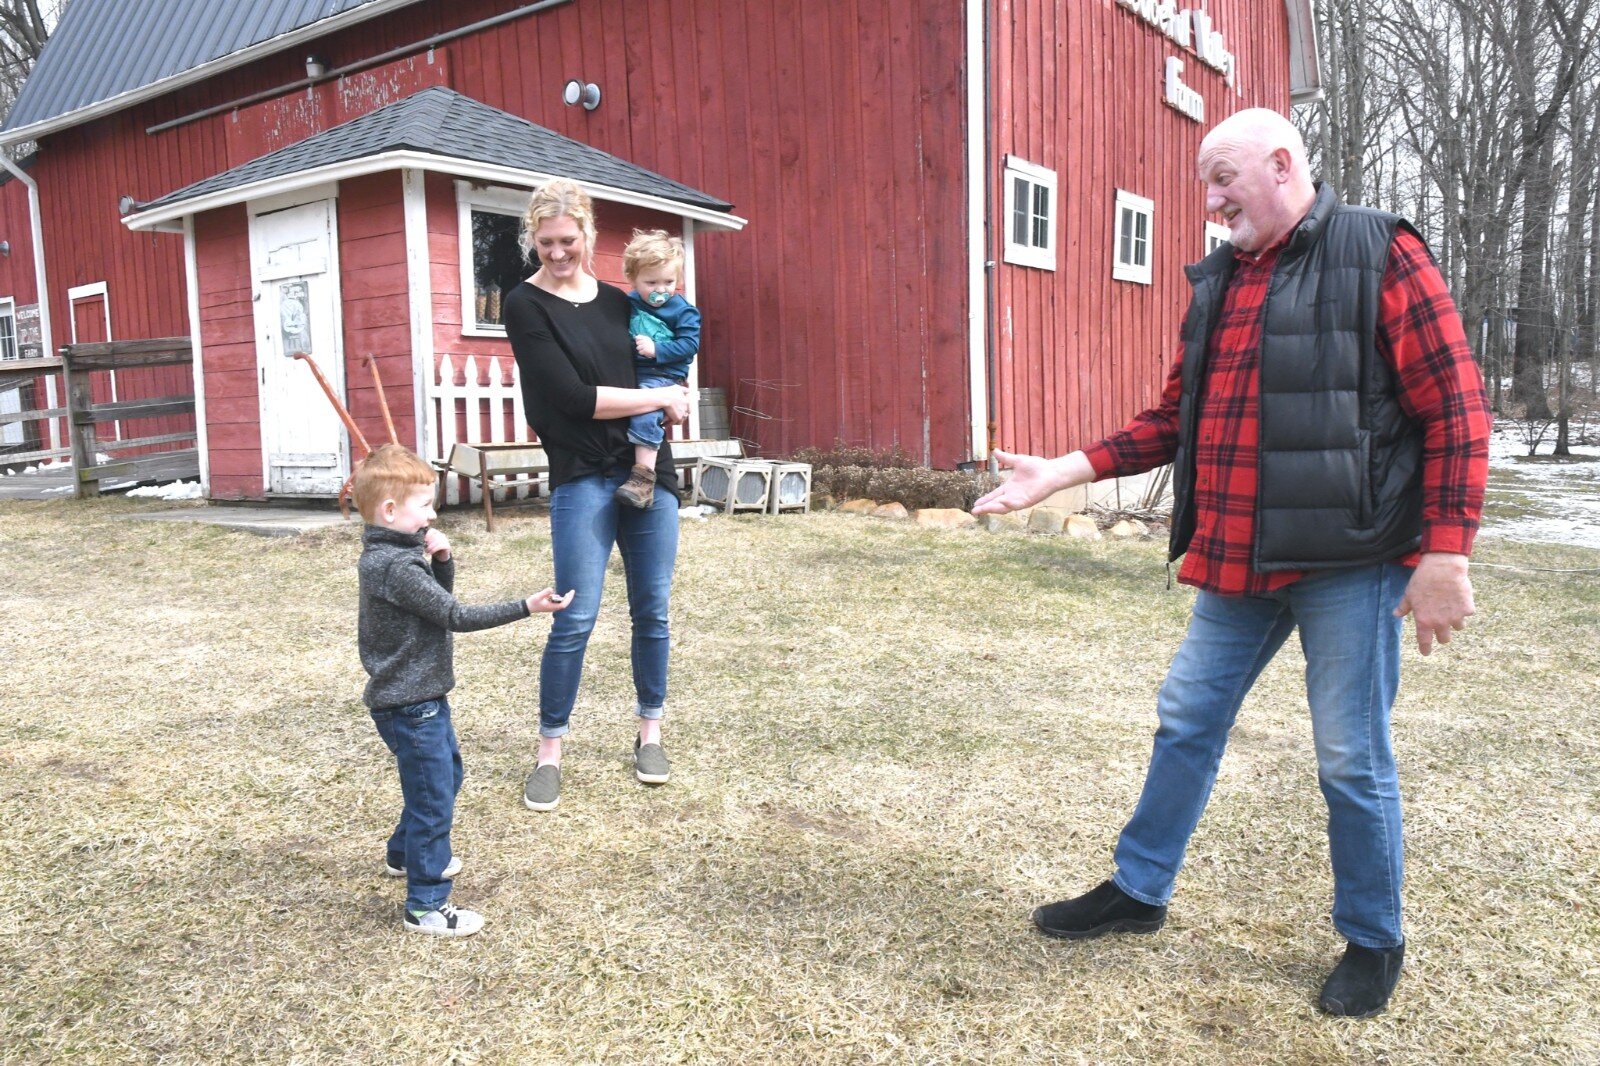 A. J. Jones, right, and Chase Warner, son of the new property owners, tease each other. Terin Warner, seen holding son Noah, and her husband Cody are the new owners.